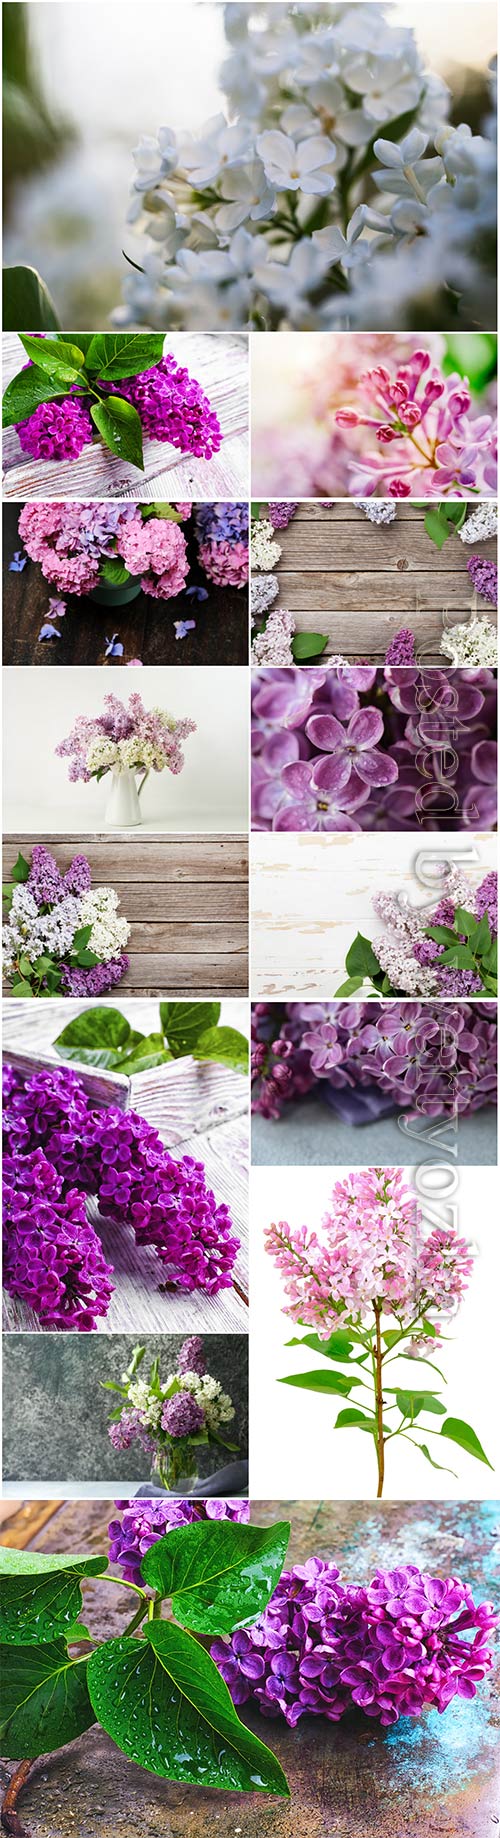 Lilac branches beautiful stock photo